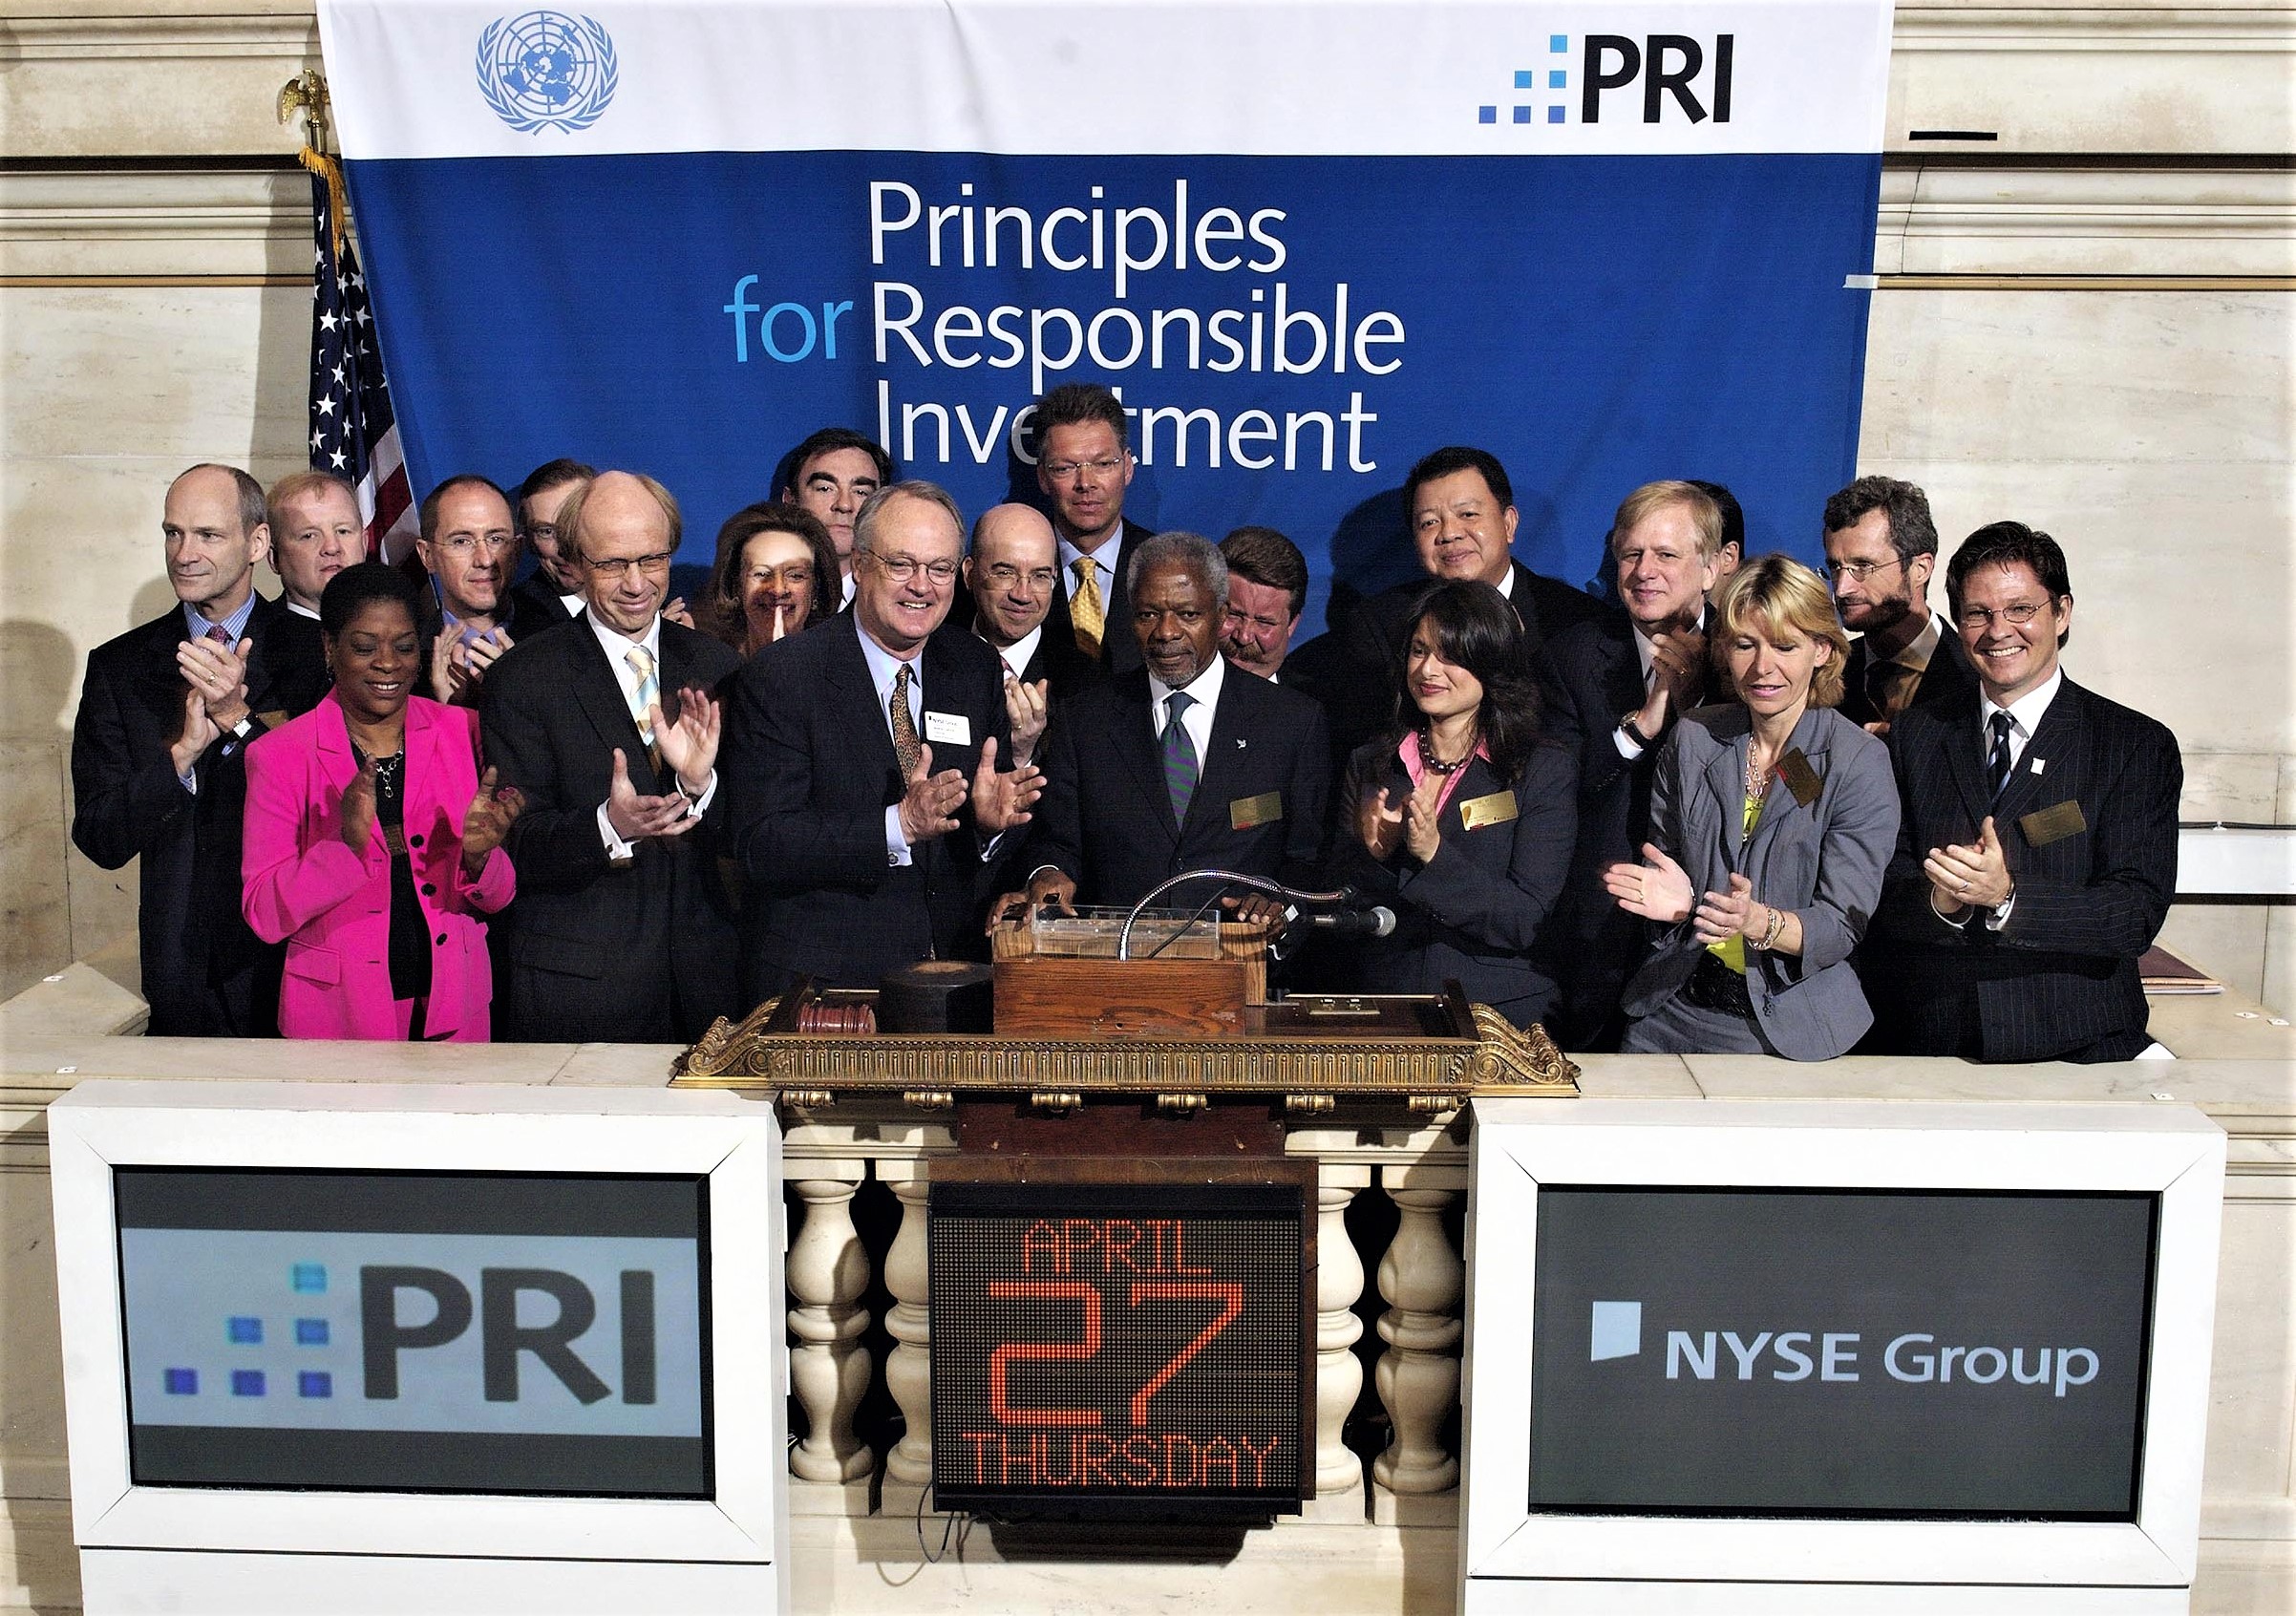 Launch of the U.N. Principles for Responsible Investment at the NYSE.